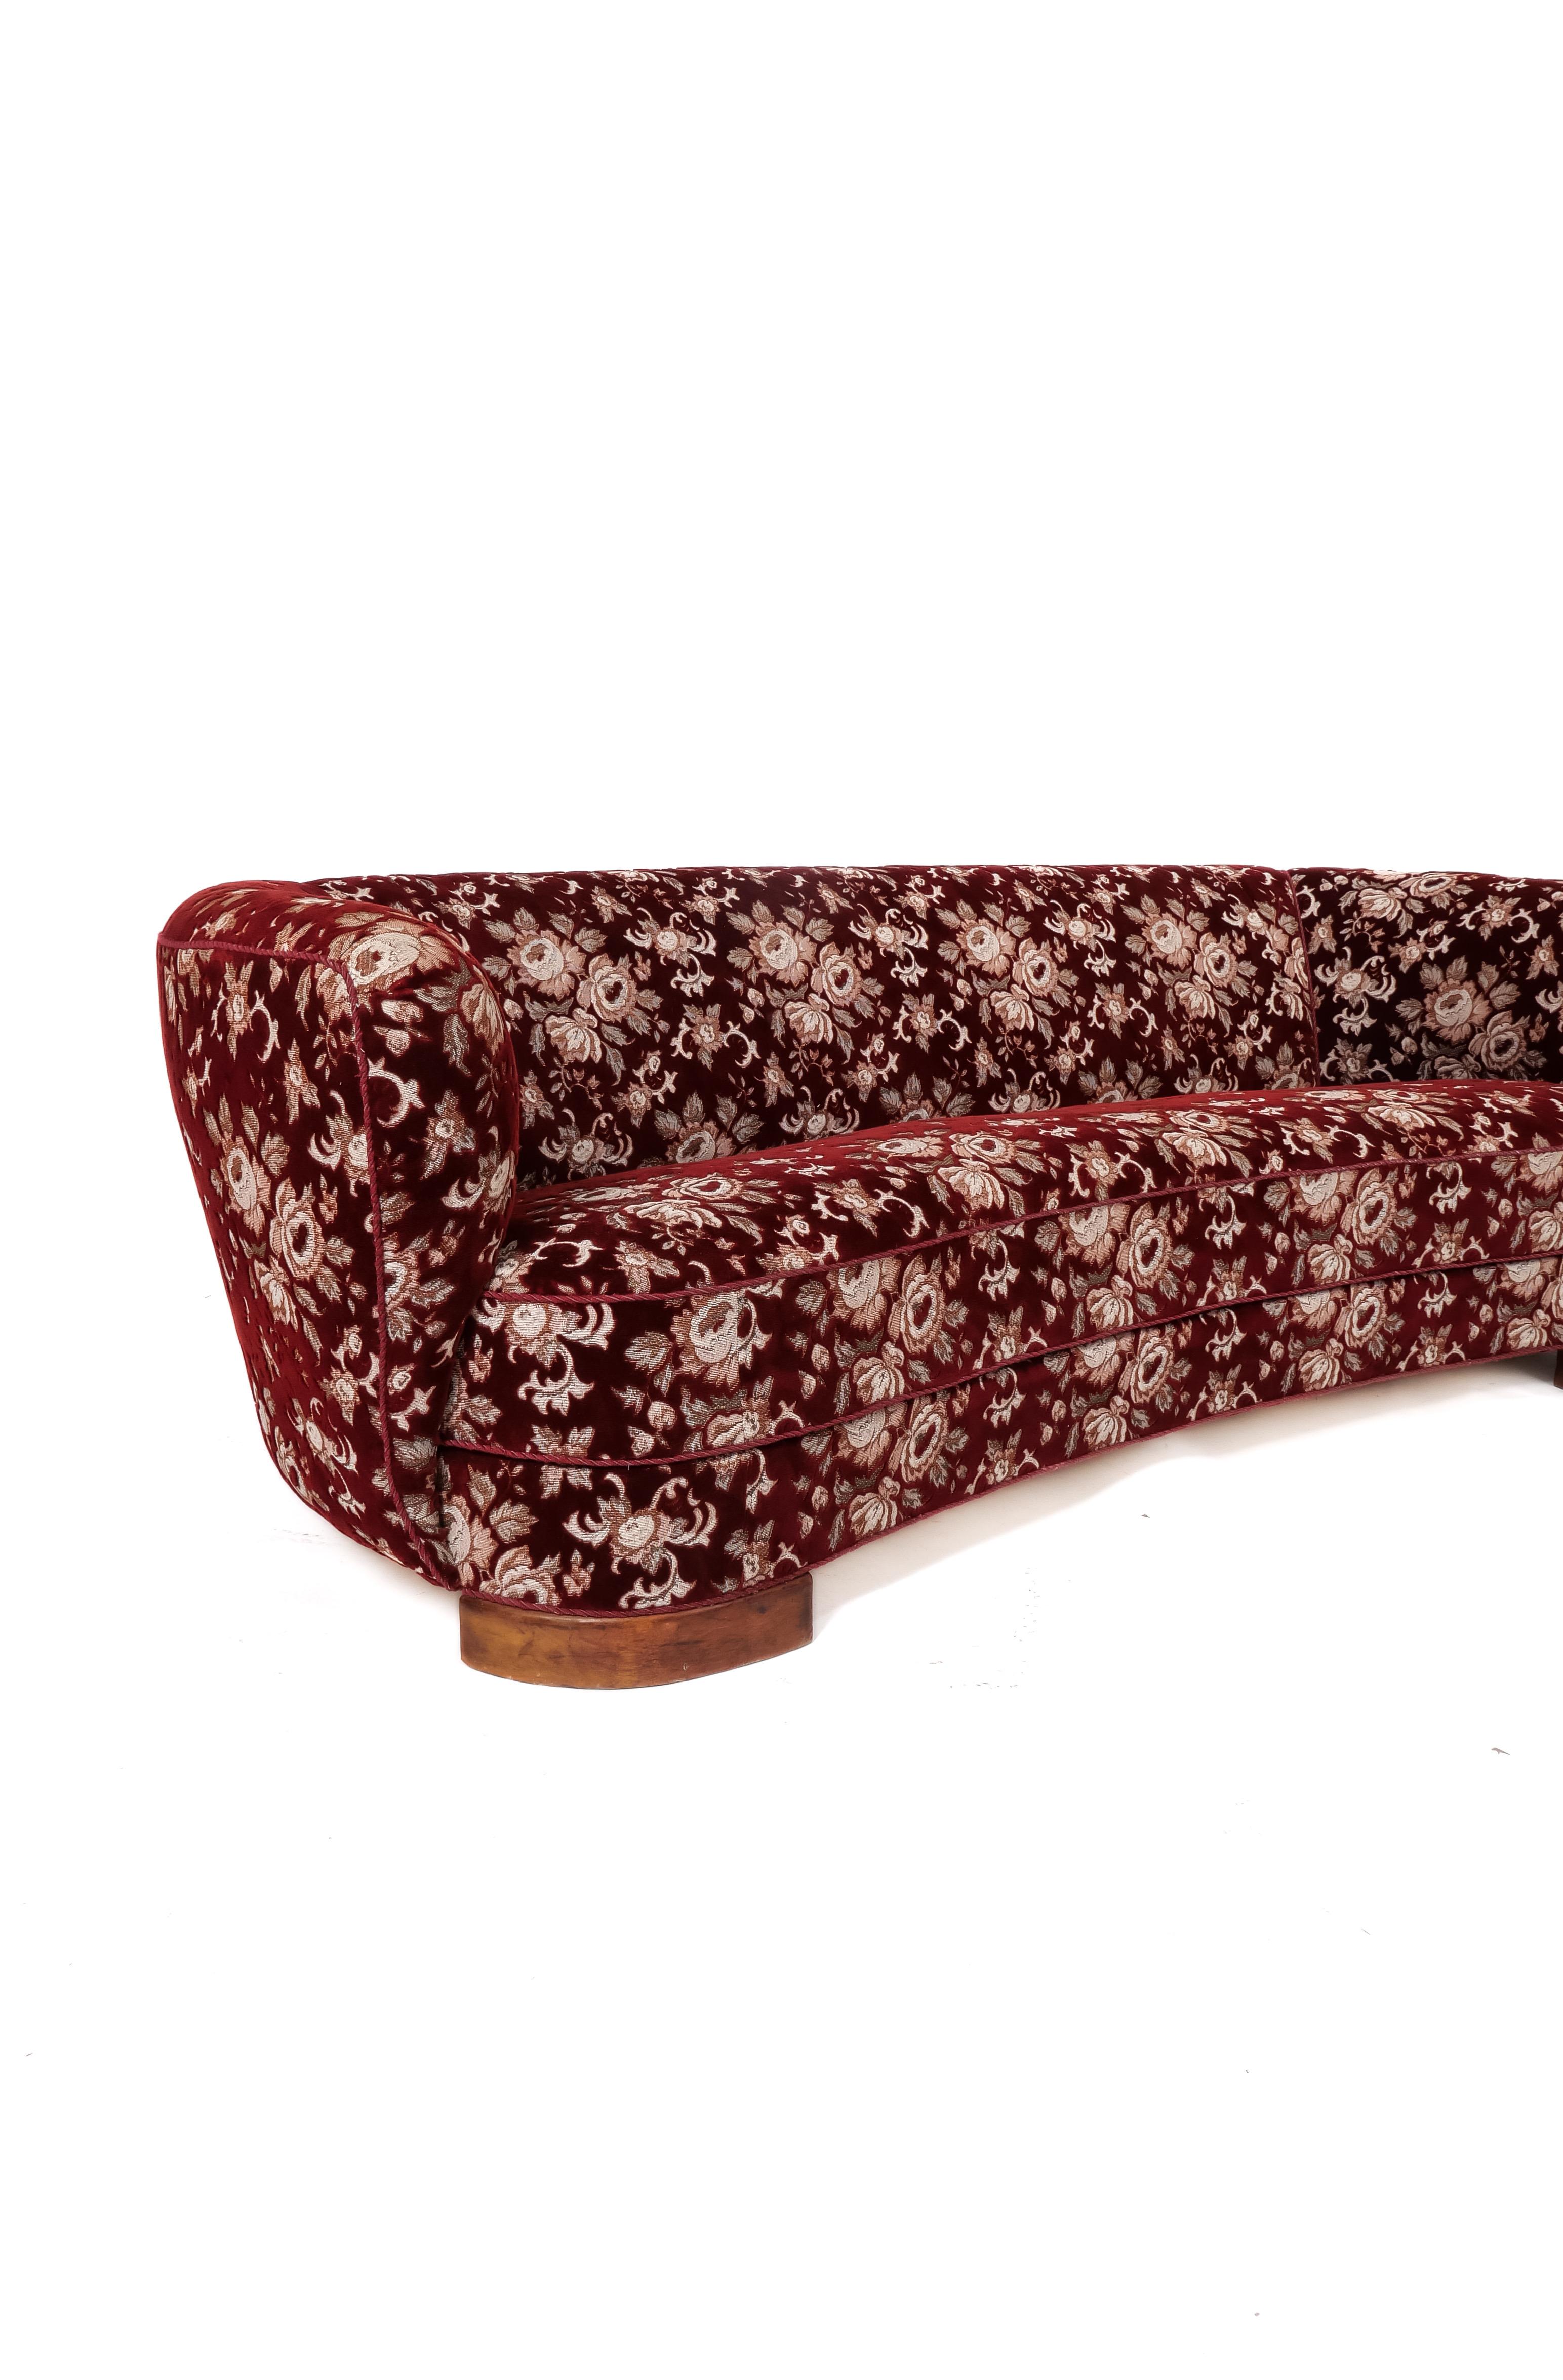 Fabulous floral velvet upholstery on this classic shape. Circa 1930s “Banana” sofa, elegantly curved  with deep seating area its low-slung back profile and strong arm lines create a dramatic statement. Stained beech legs. Upholstery in very good